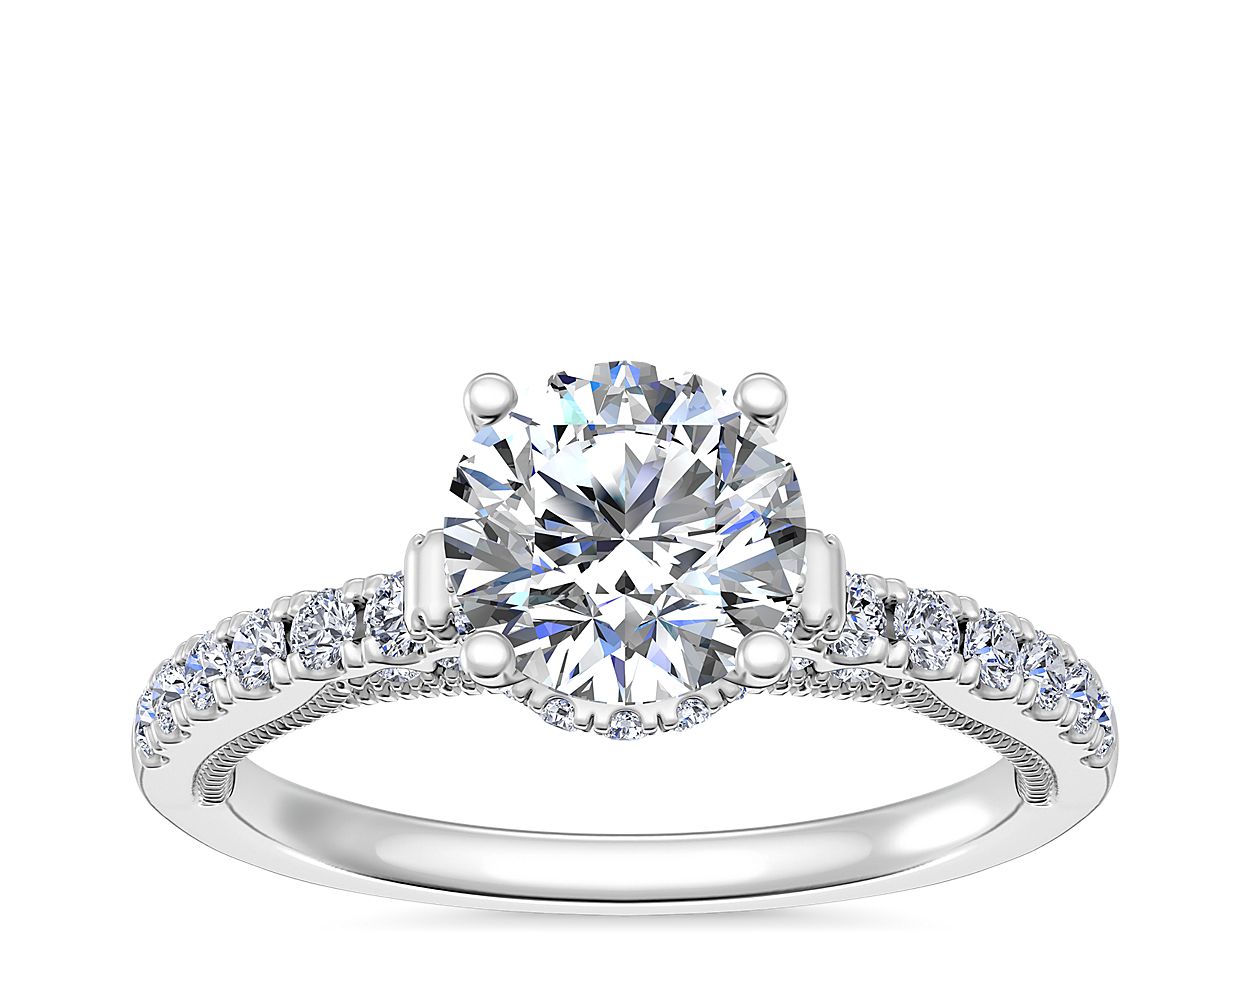 Lace Bridge Hidden Halo and Pave Diamond Engagement Ring in 14k White ...